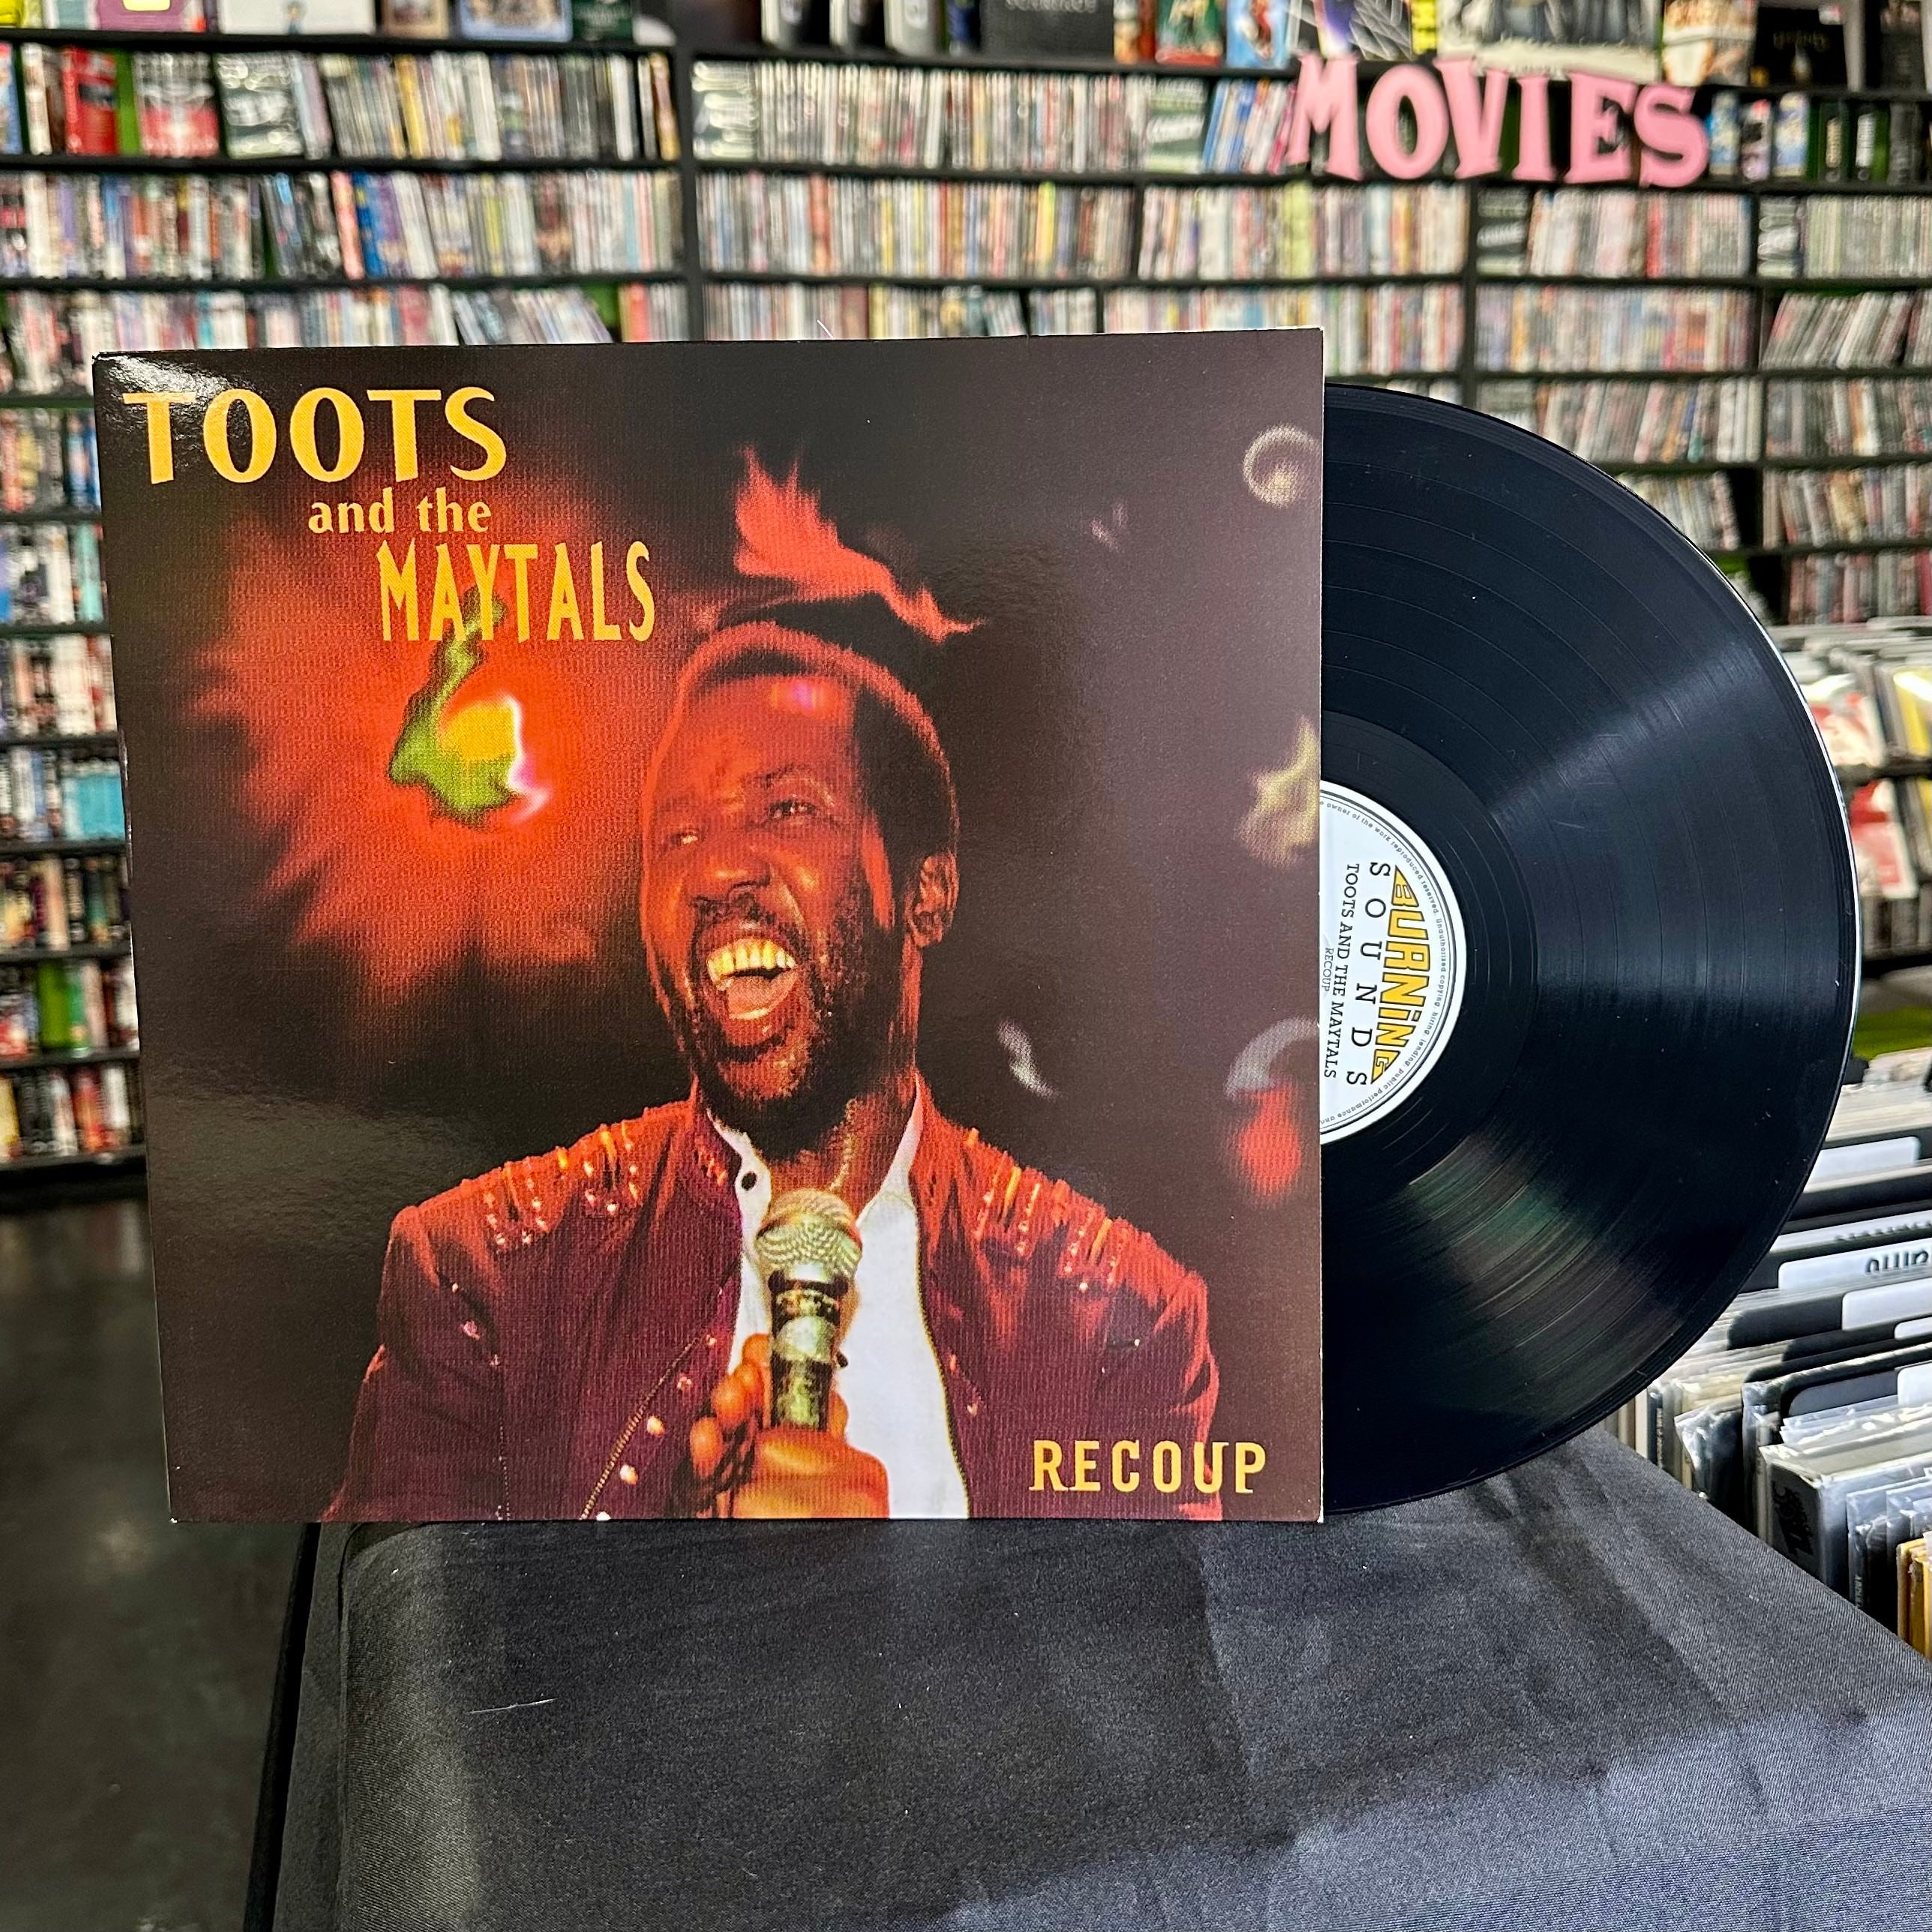 Toots & The Maytals- Recoup (2018 Reissue) - Darkside Records